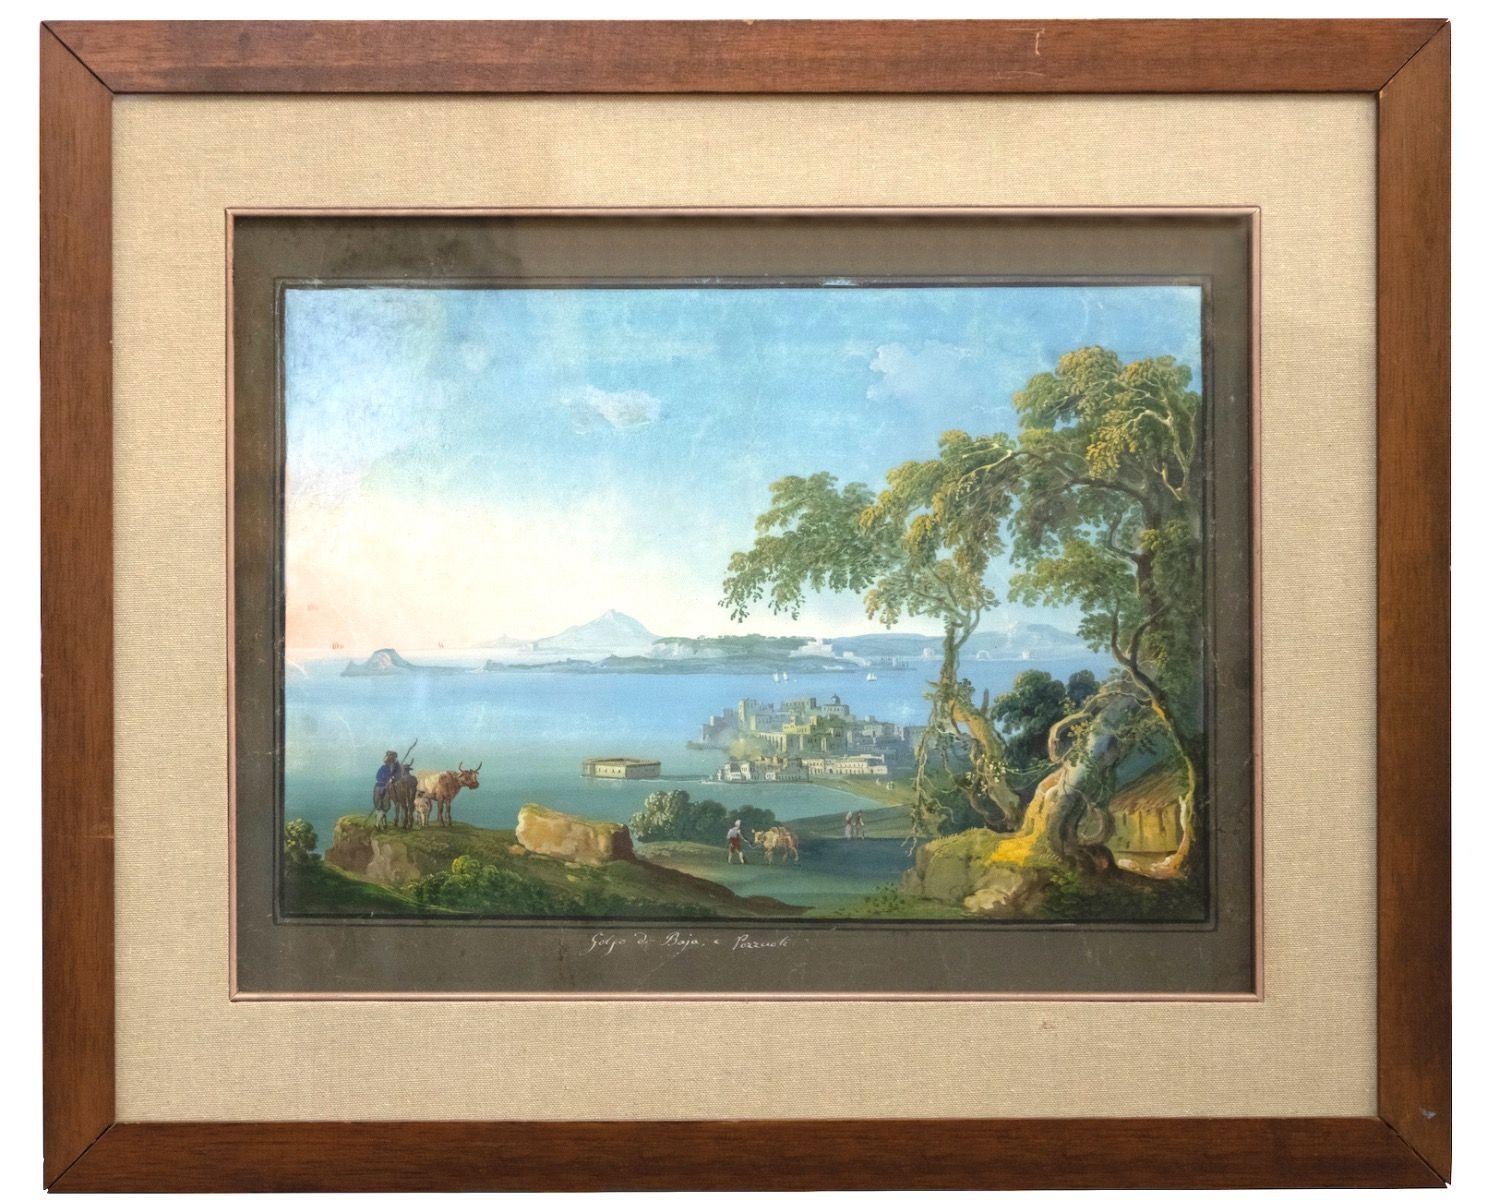 Unknown Landscape Painting - The Gulf and the Bay of Pozzuoli - Gouache - Early 19th Century